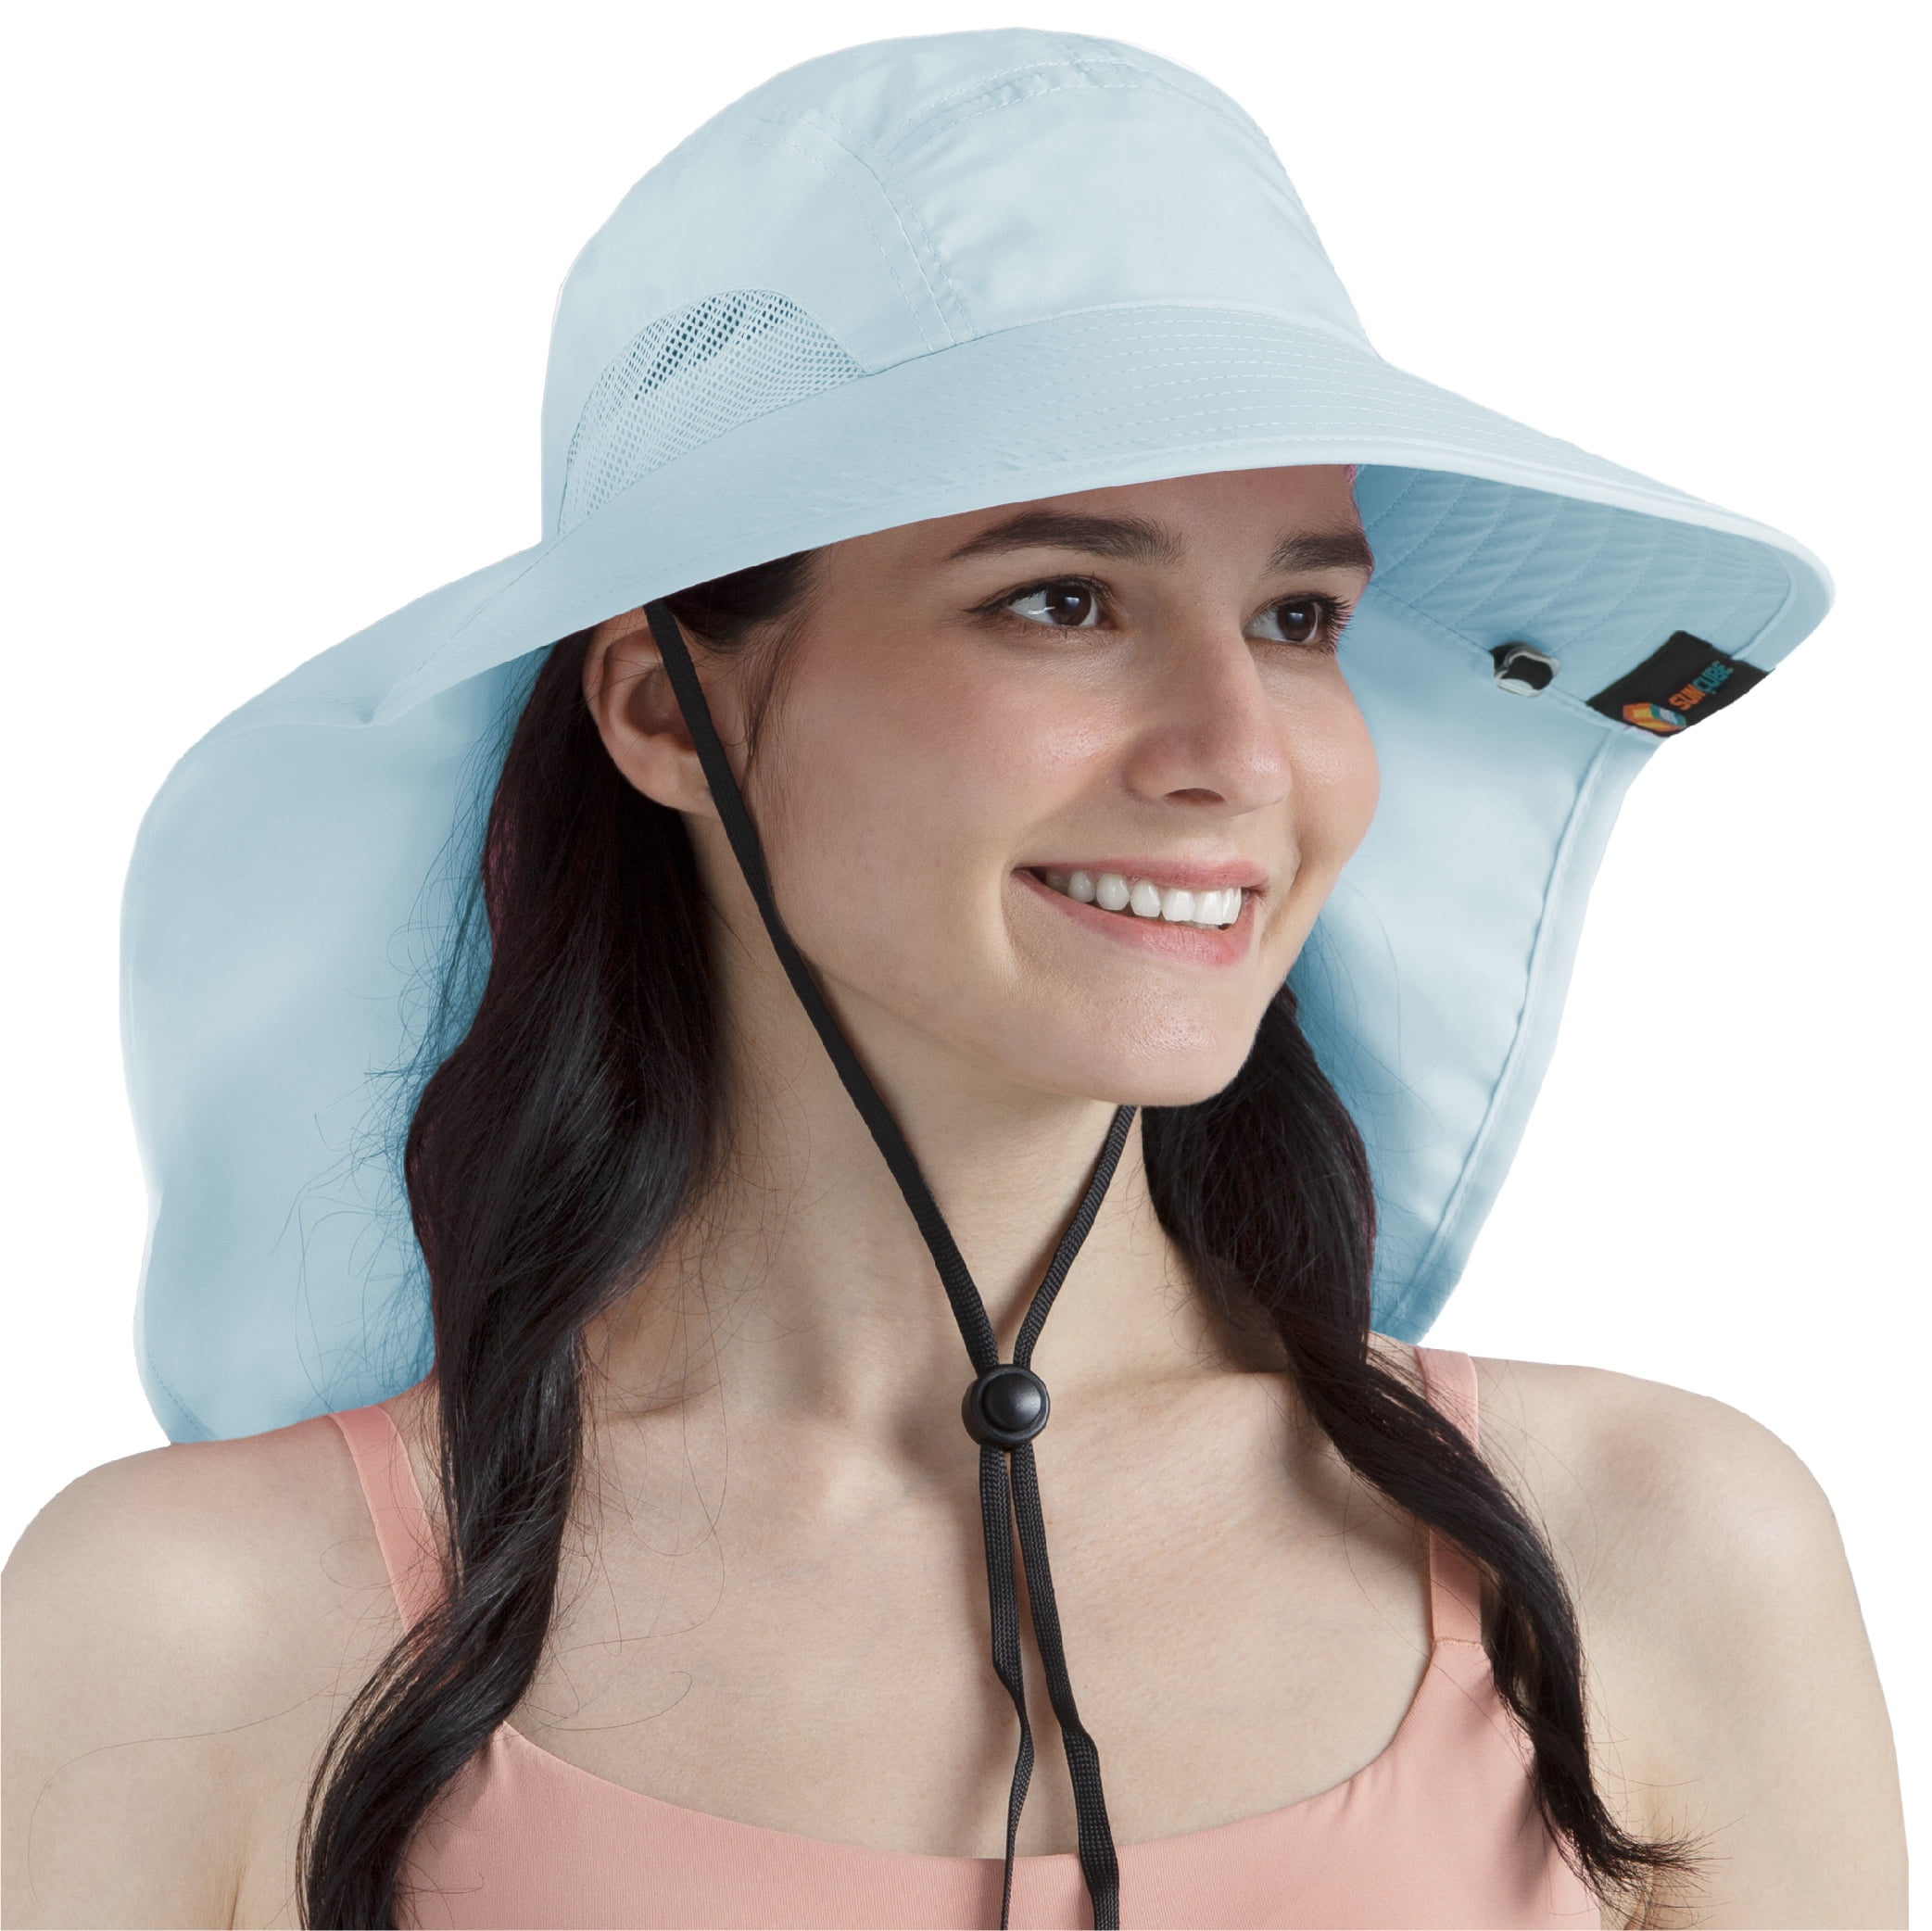 SUN CUBE Wide Brim Sun Hat with Neck Flap, Fishing Hiking for Men